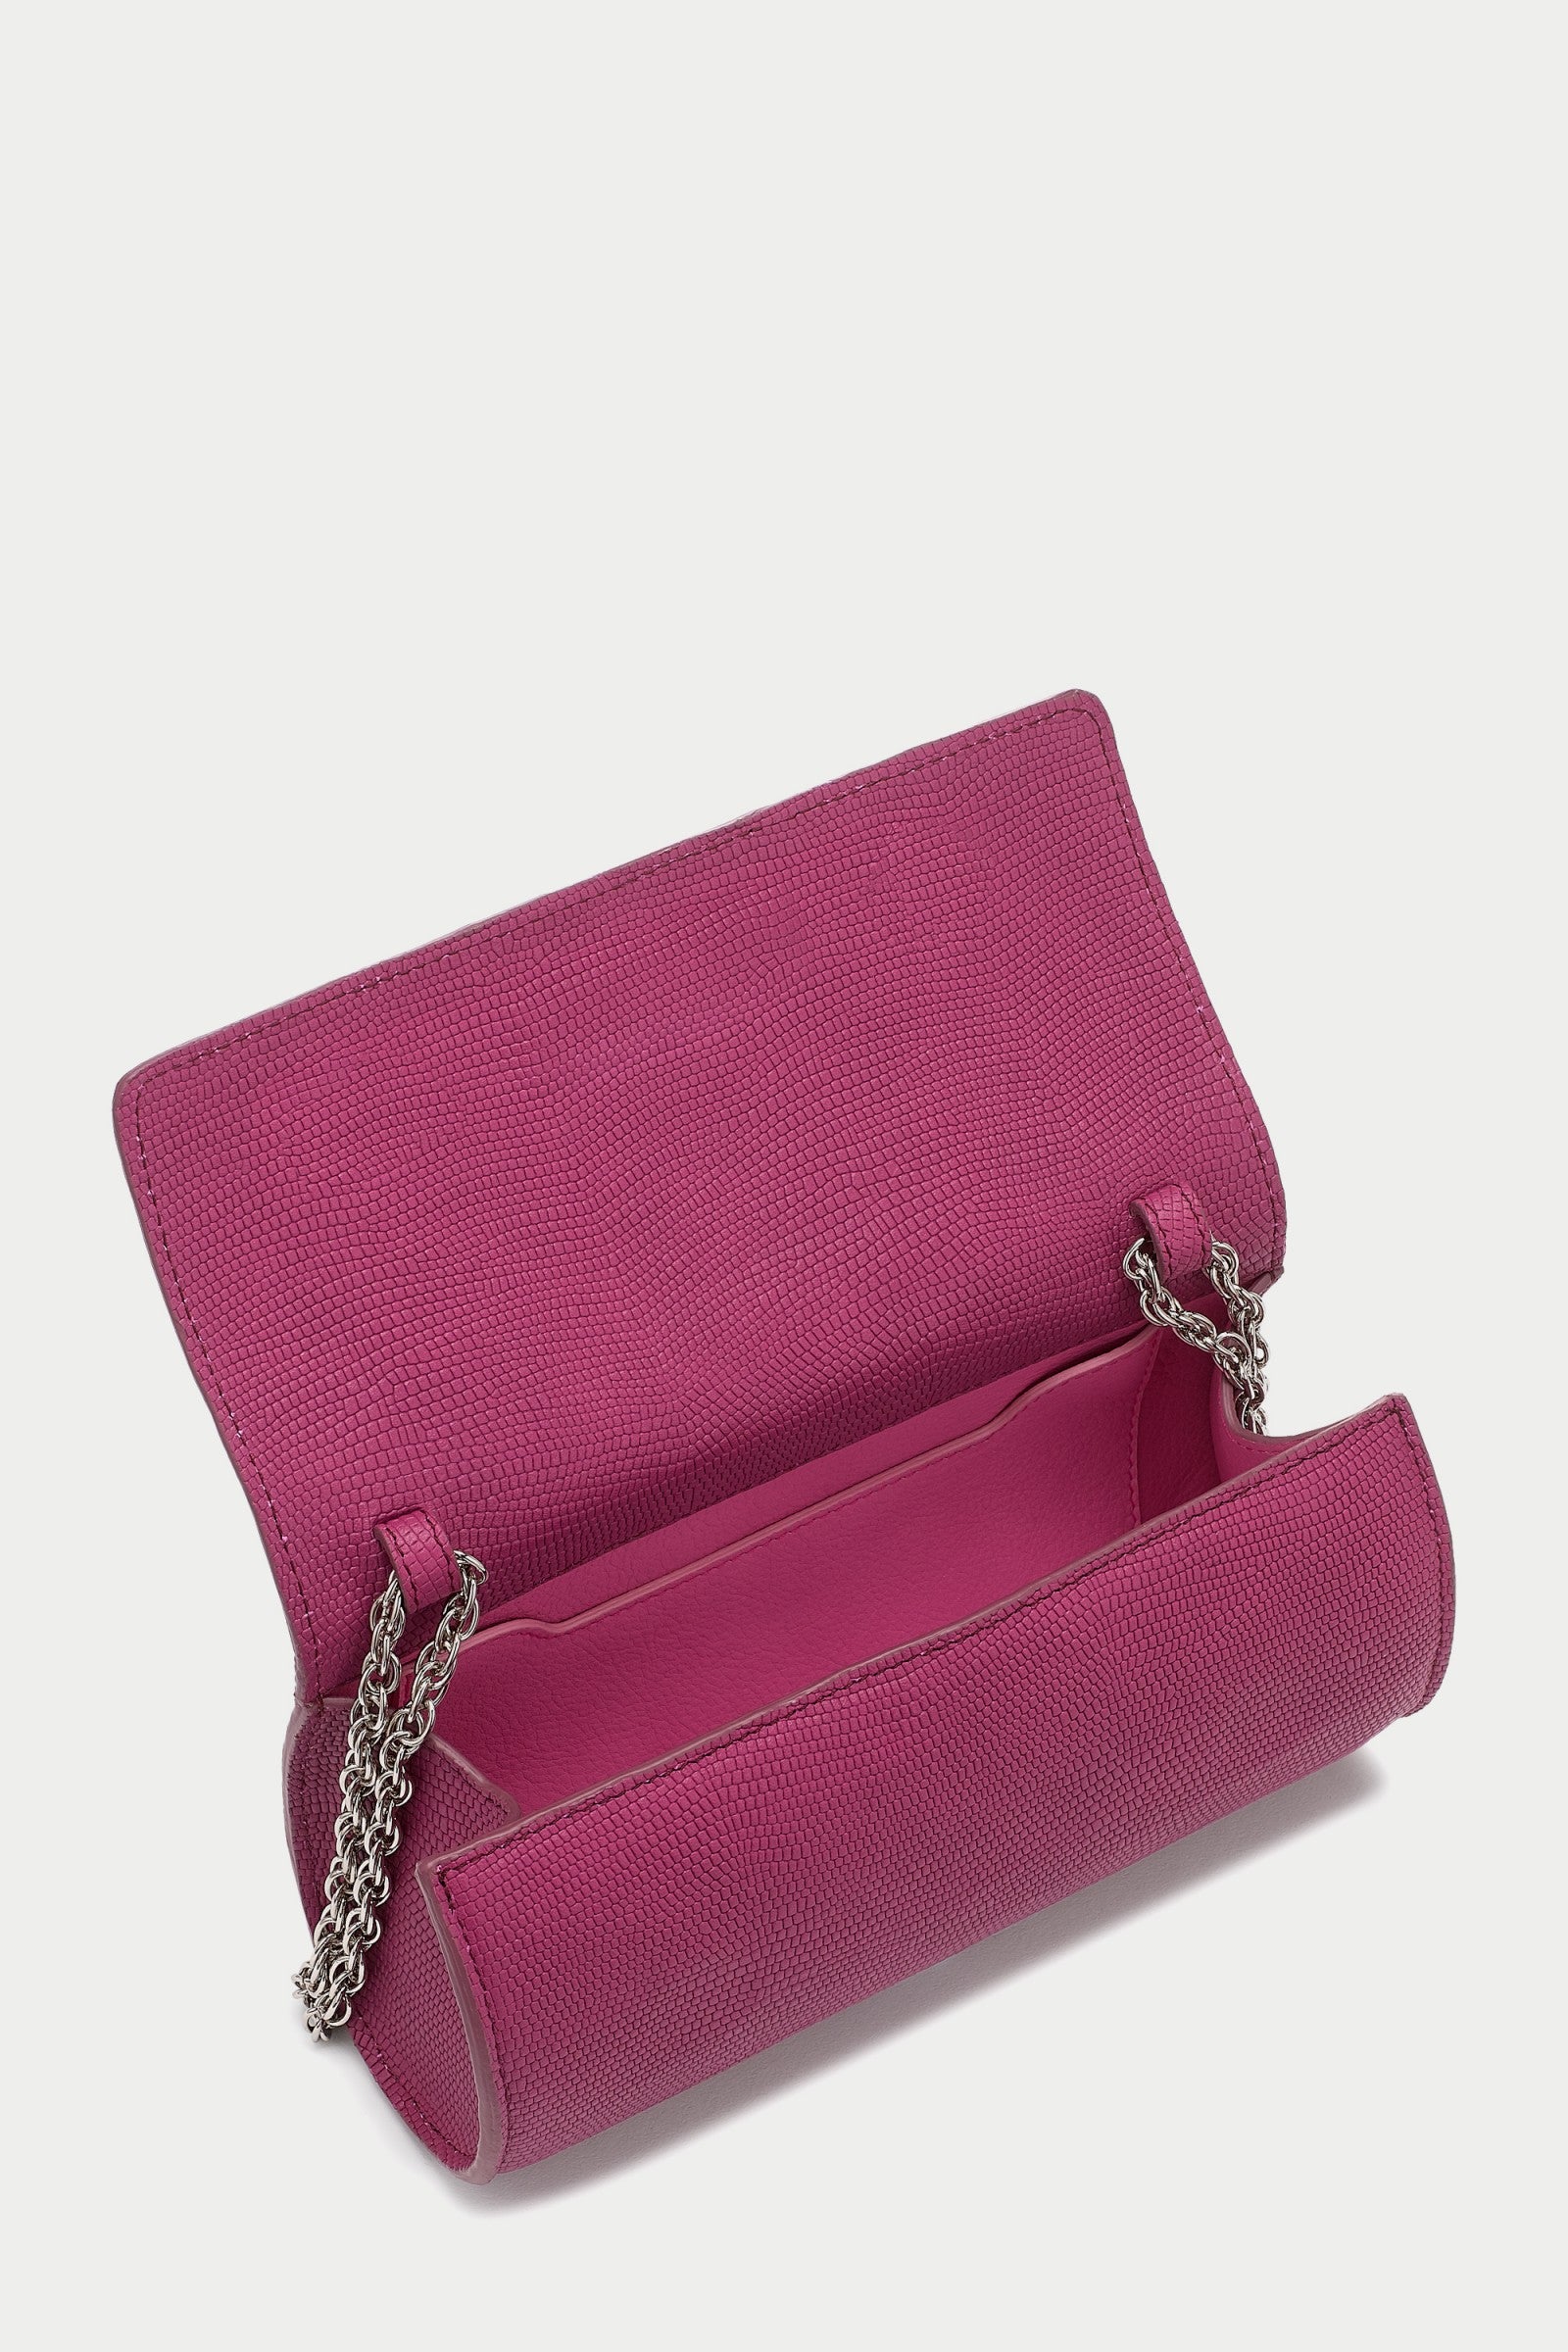 Kinsely FUXIA Leather Roll Clutch